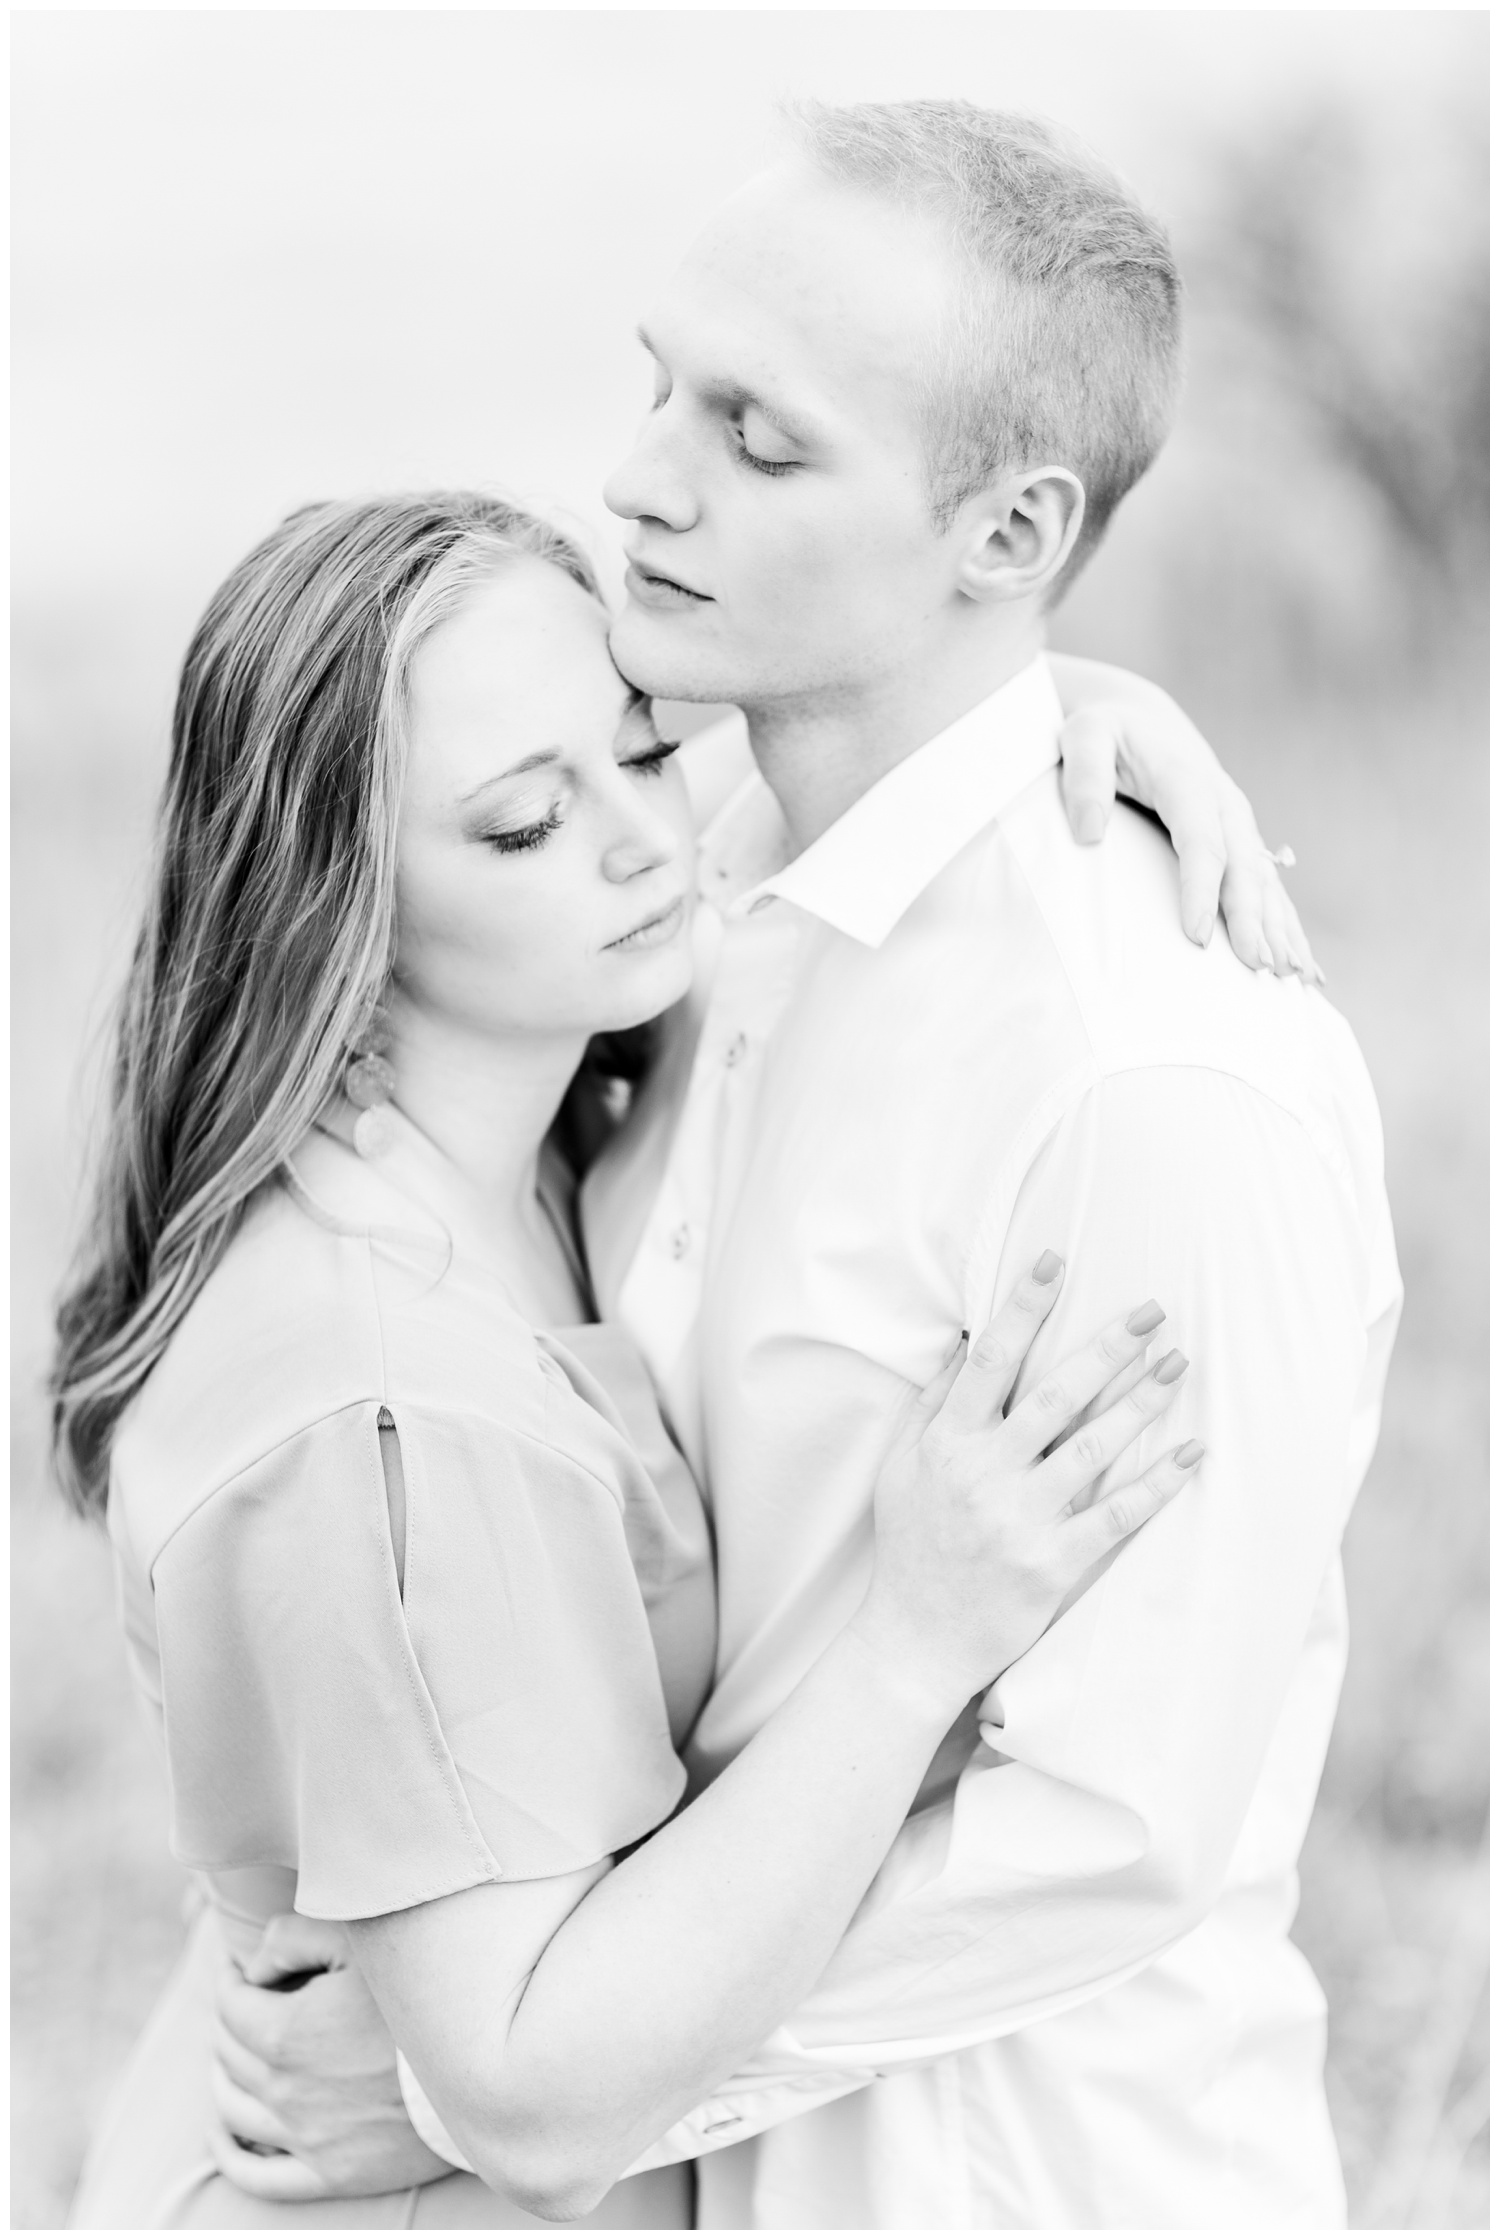 Brenna and Jacob embrace in the middle of a grassy field in front of a lake | CB Studio